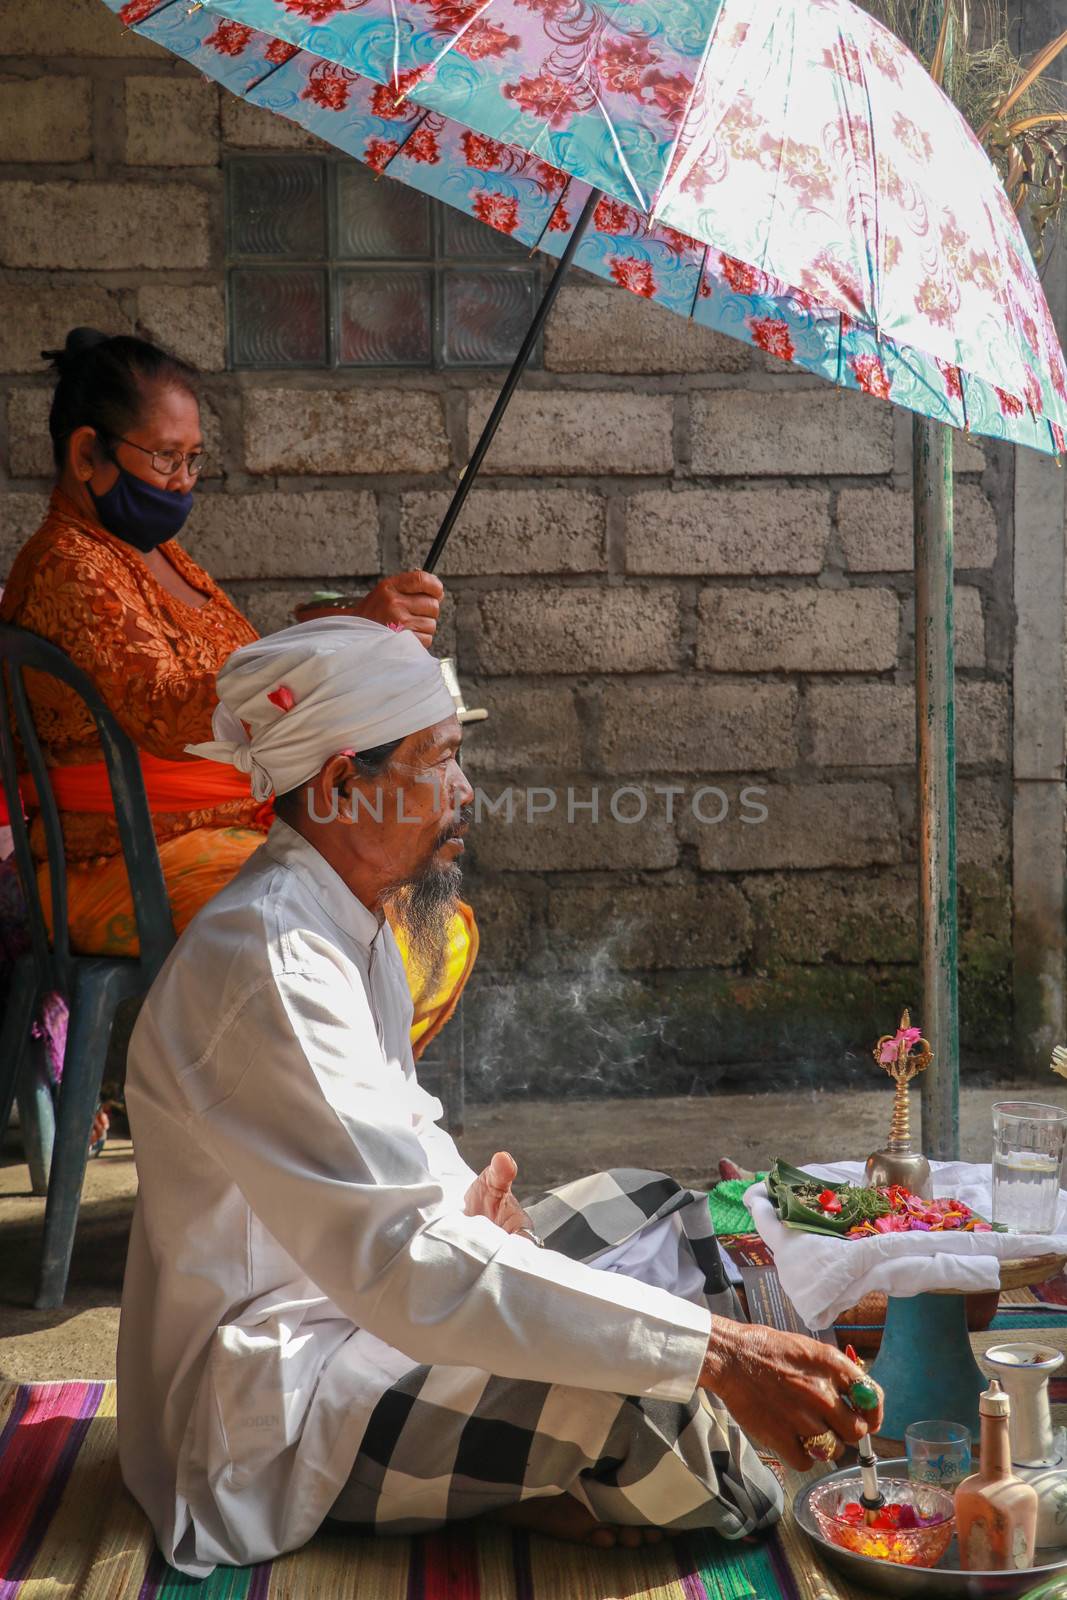 alinese Brahman performing morning rituals in the Bali temple, Indonesia.